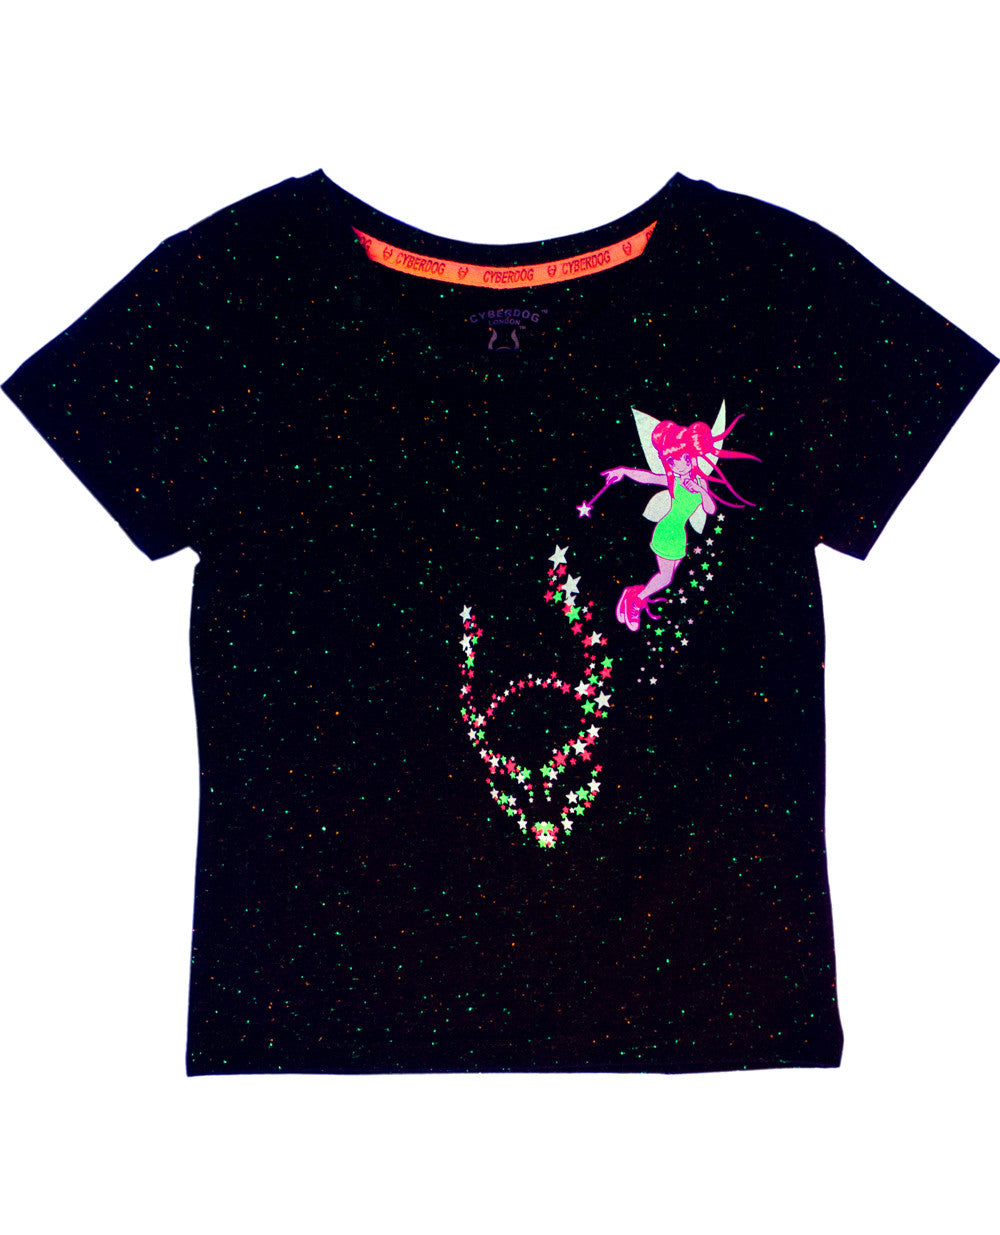 KIDS GIRL SPECLE S/S SPACE FAIRY.